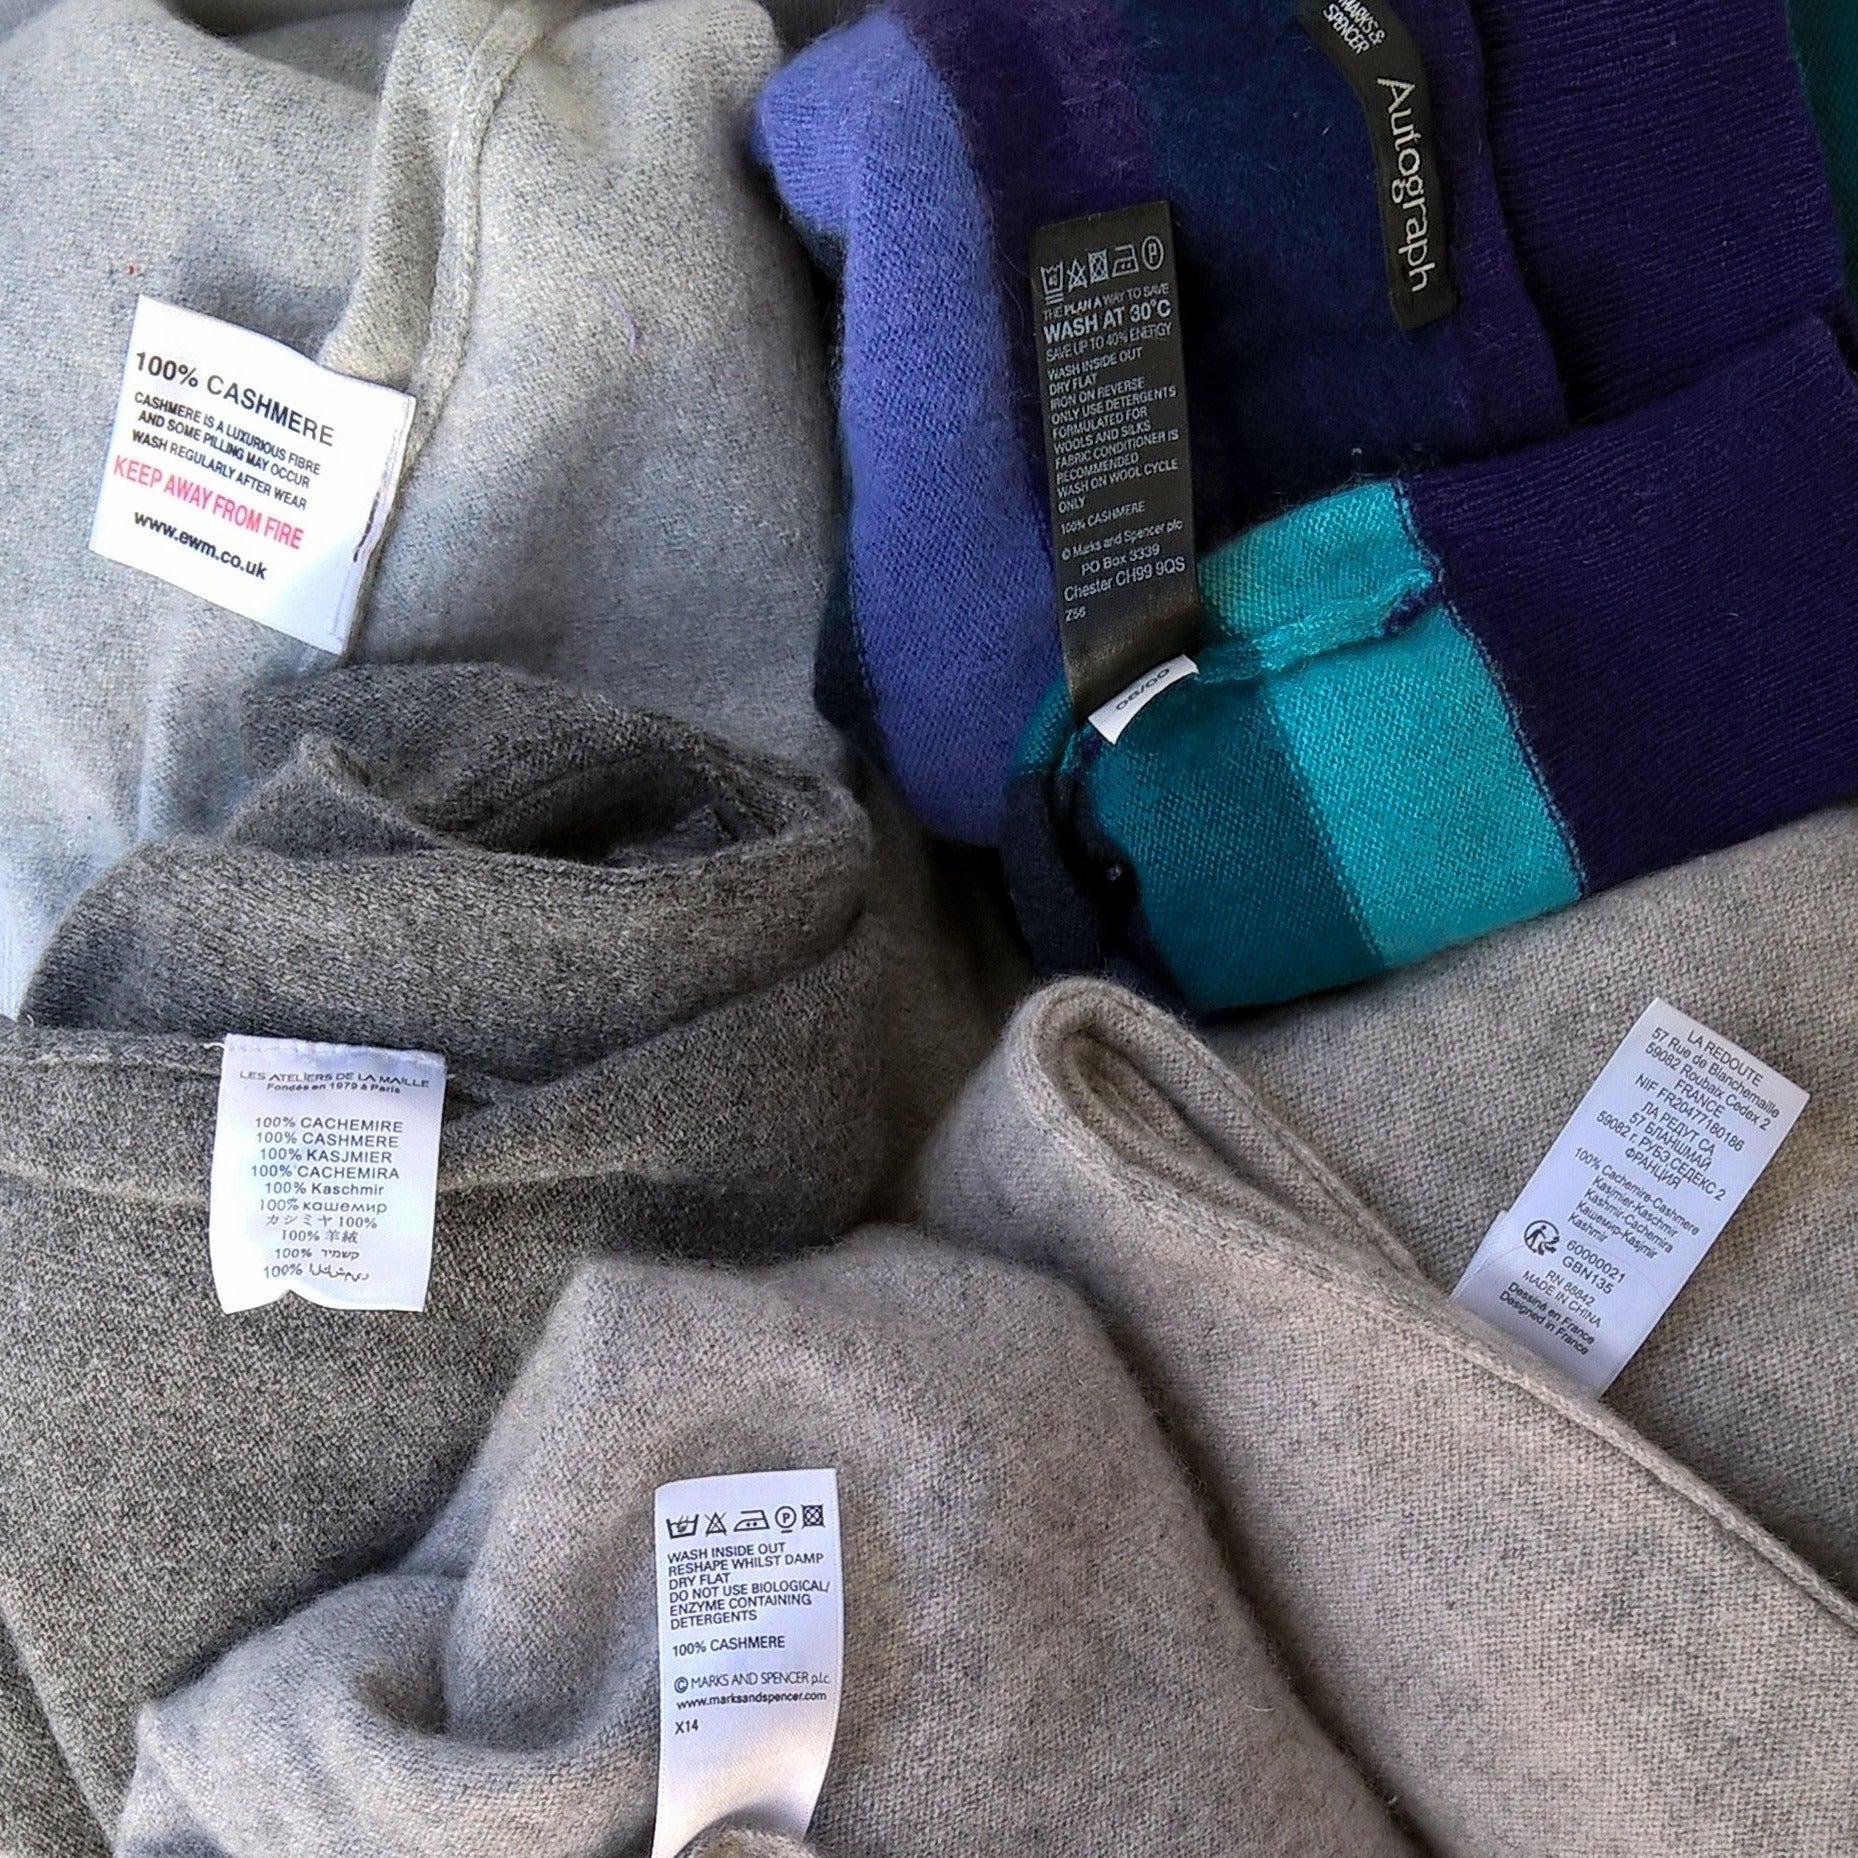 A range of pure cashmere knitwear for upcycling